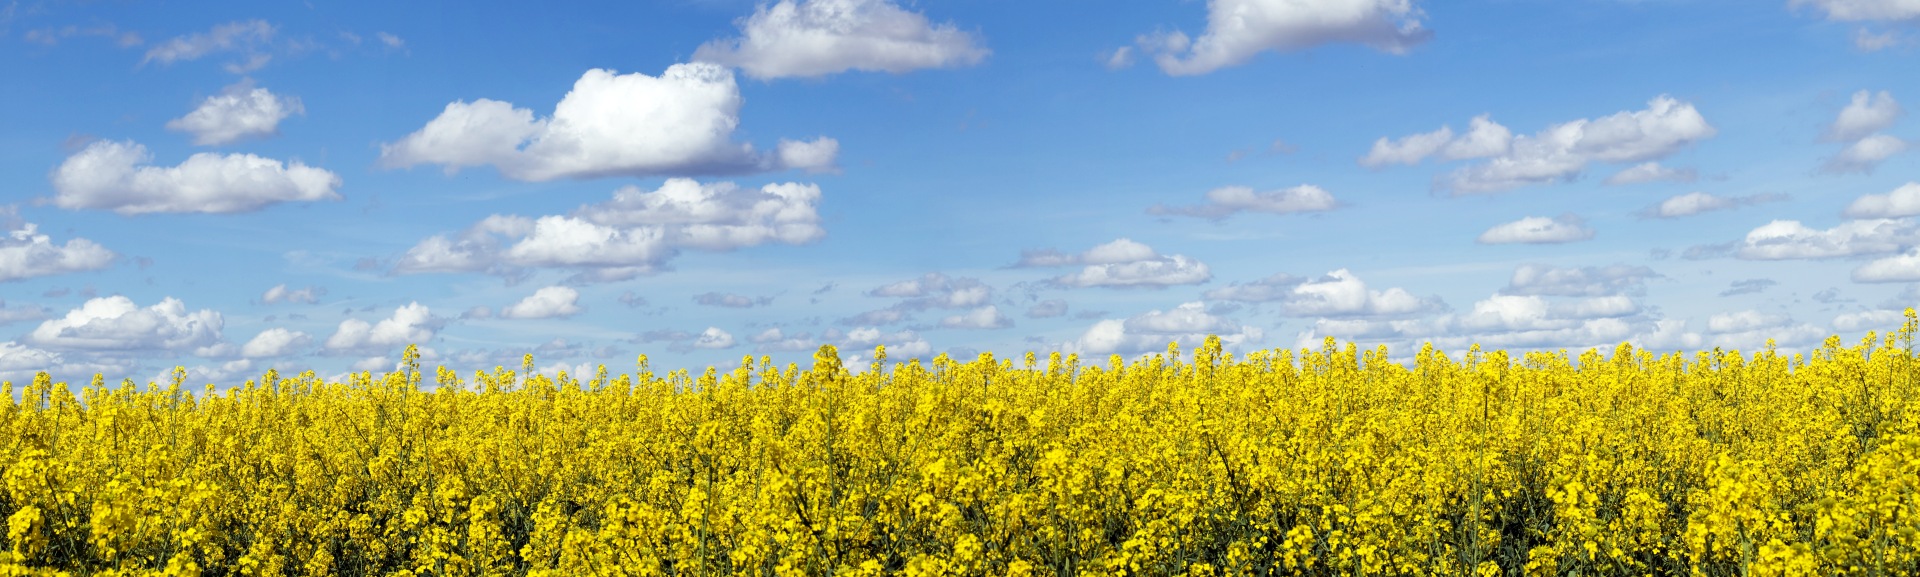 Panoramic landscape of a rapeseed field under blue sky